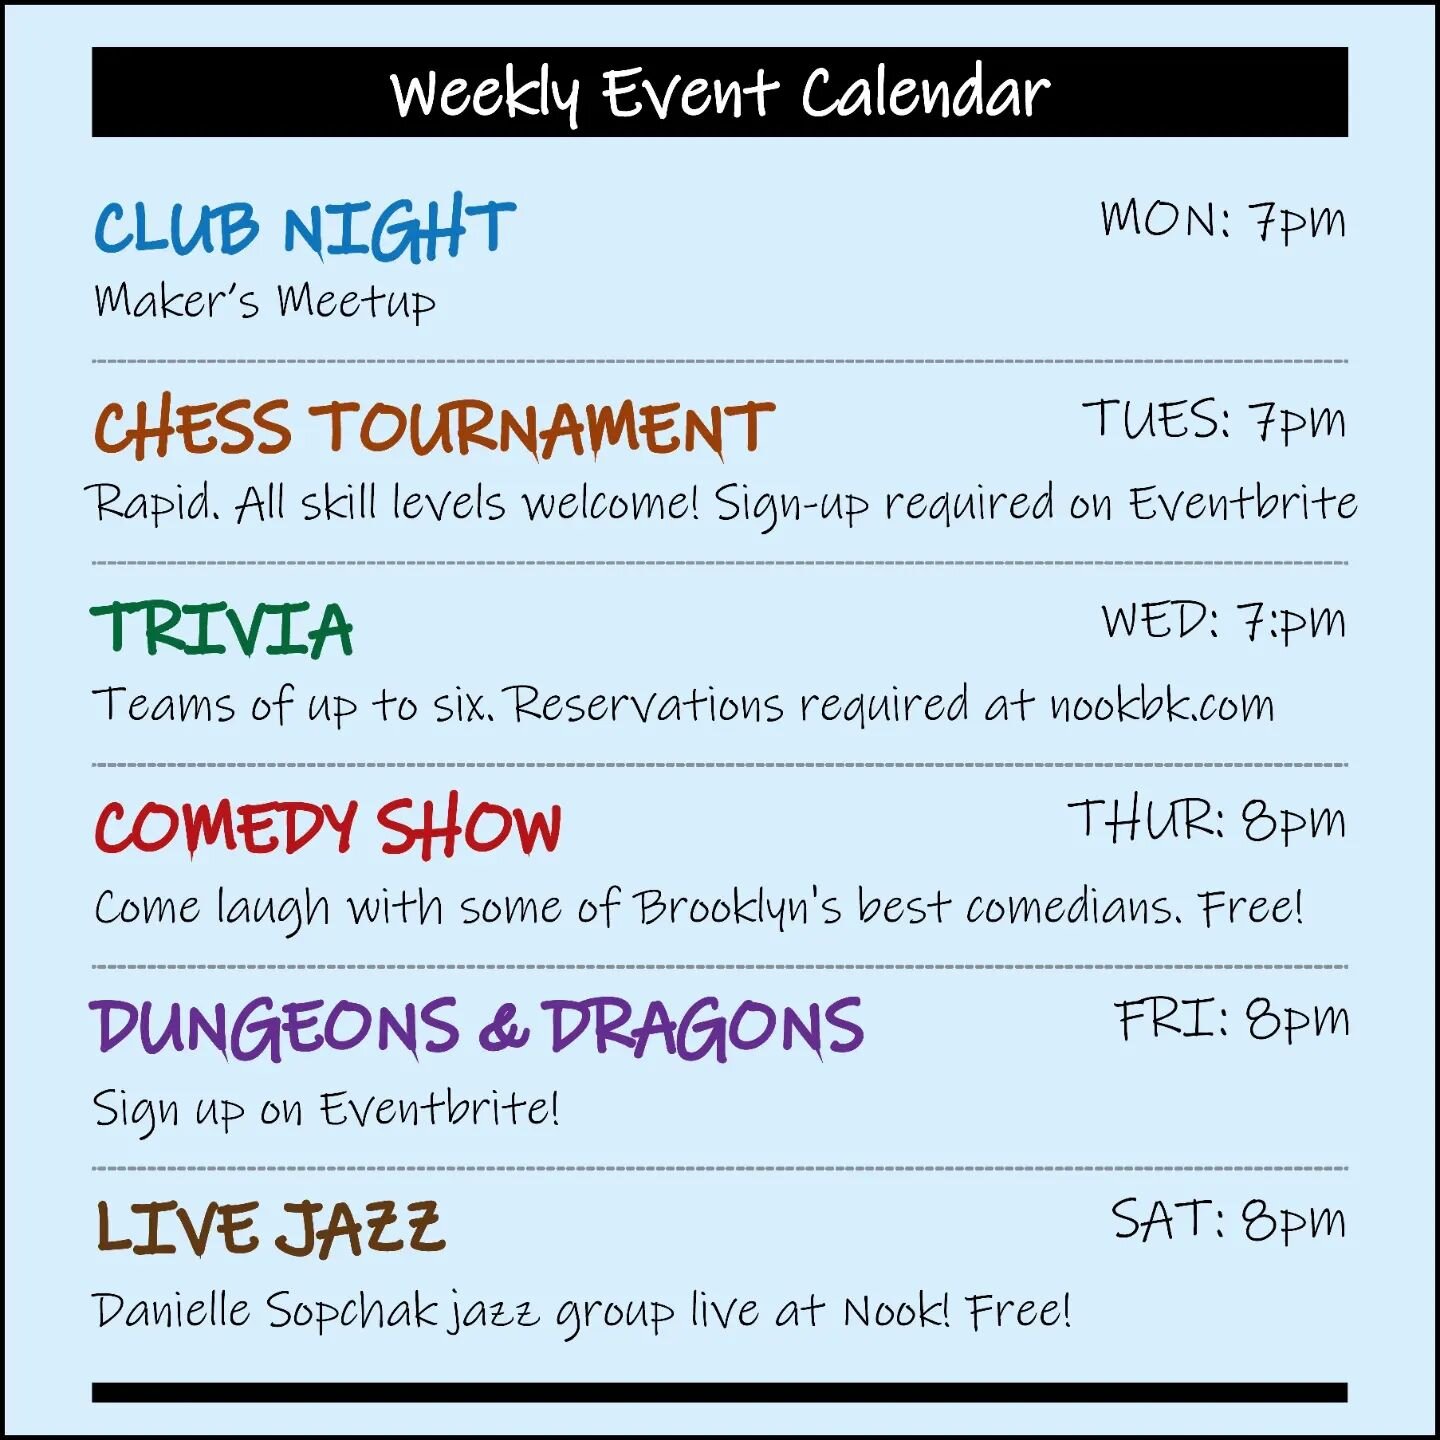 Nook at Night Events this Week!

💡CLUB NIGHT💡Mon 7pm. Maker's Meetup

♟️CHESS TOURNAMENT♟️Tues 7pm. Register on Eventbrite 

⁉️TRIVIA ⁉️ Wed 7pm. Make reservations at nookbk.com only

🤣 COMEDY SHOW 🤣 Thur 8pm

🐉 DUNGEONS &amp; DRAGONS 🐉 Fri 8pm